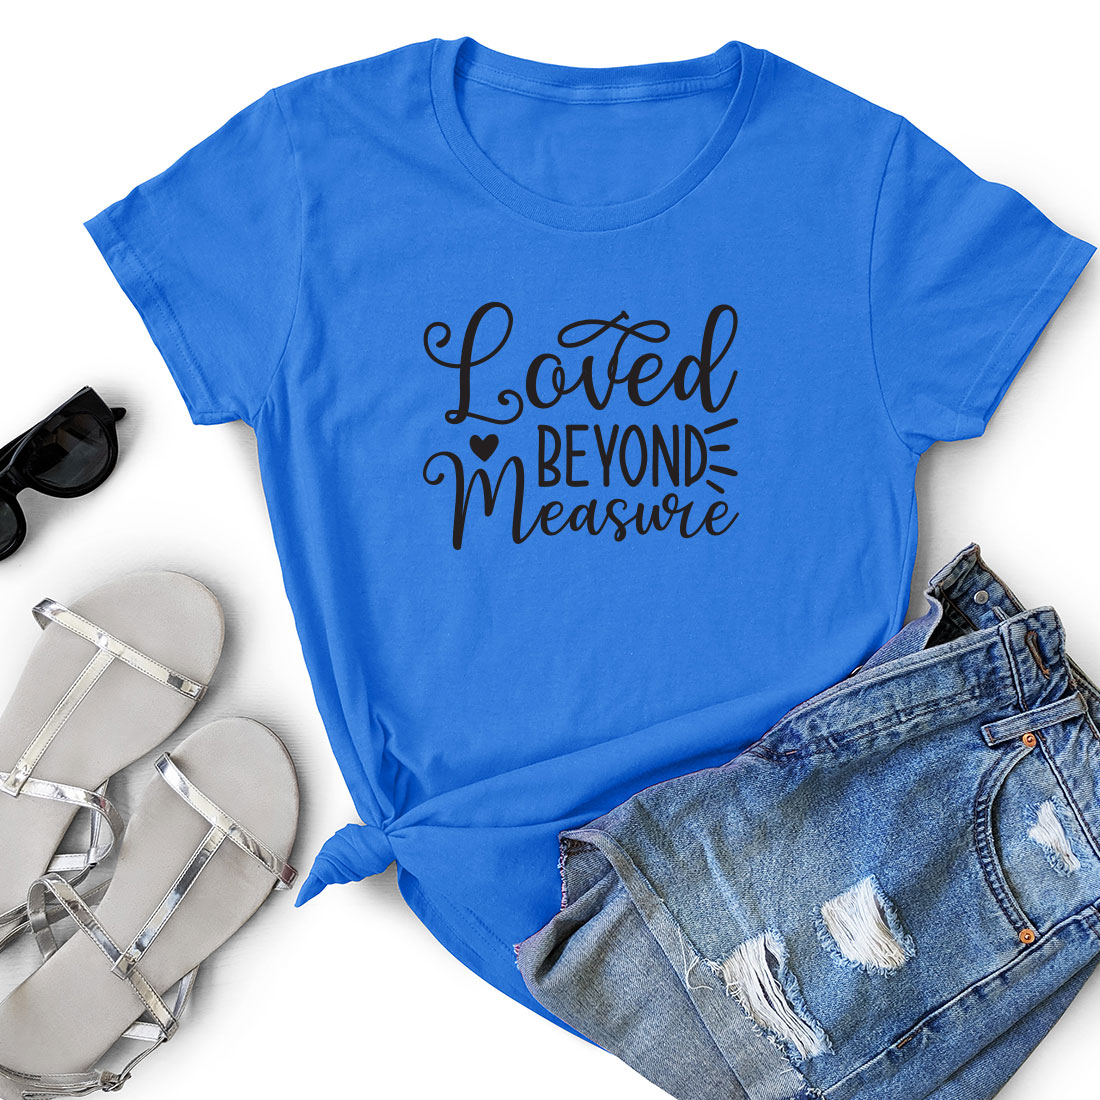 T - shirt that says loved beyond measure.